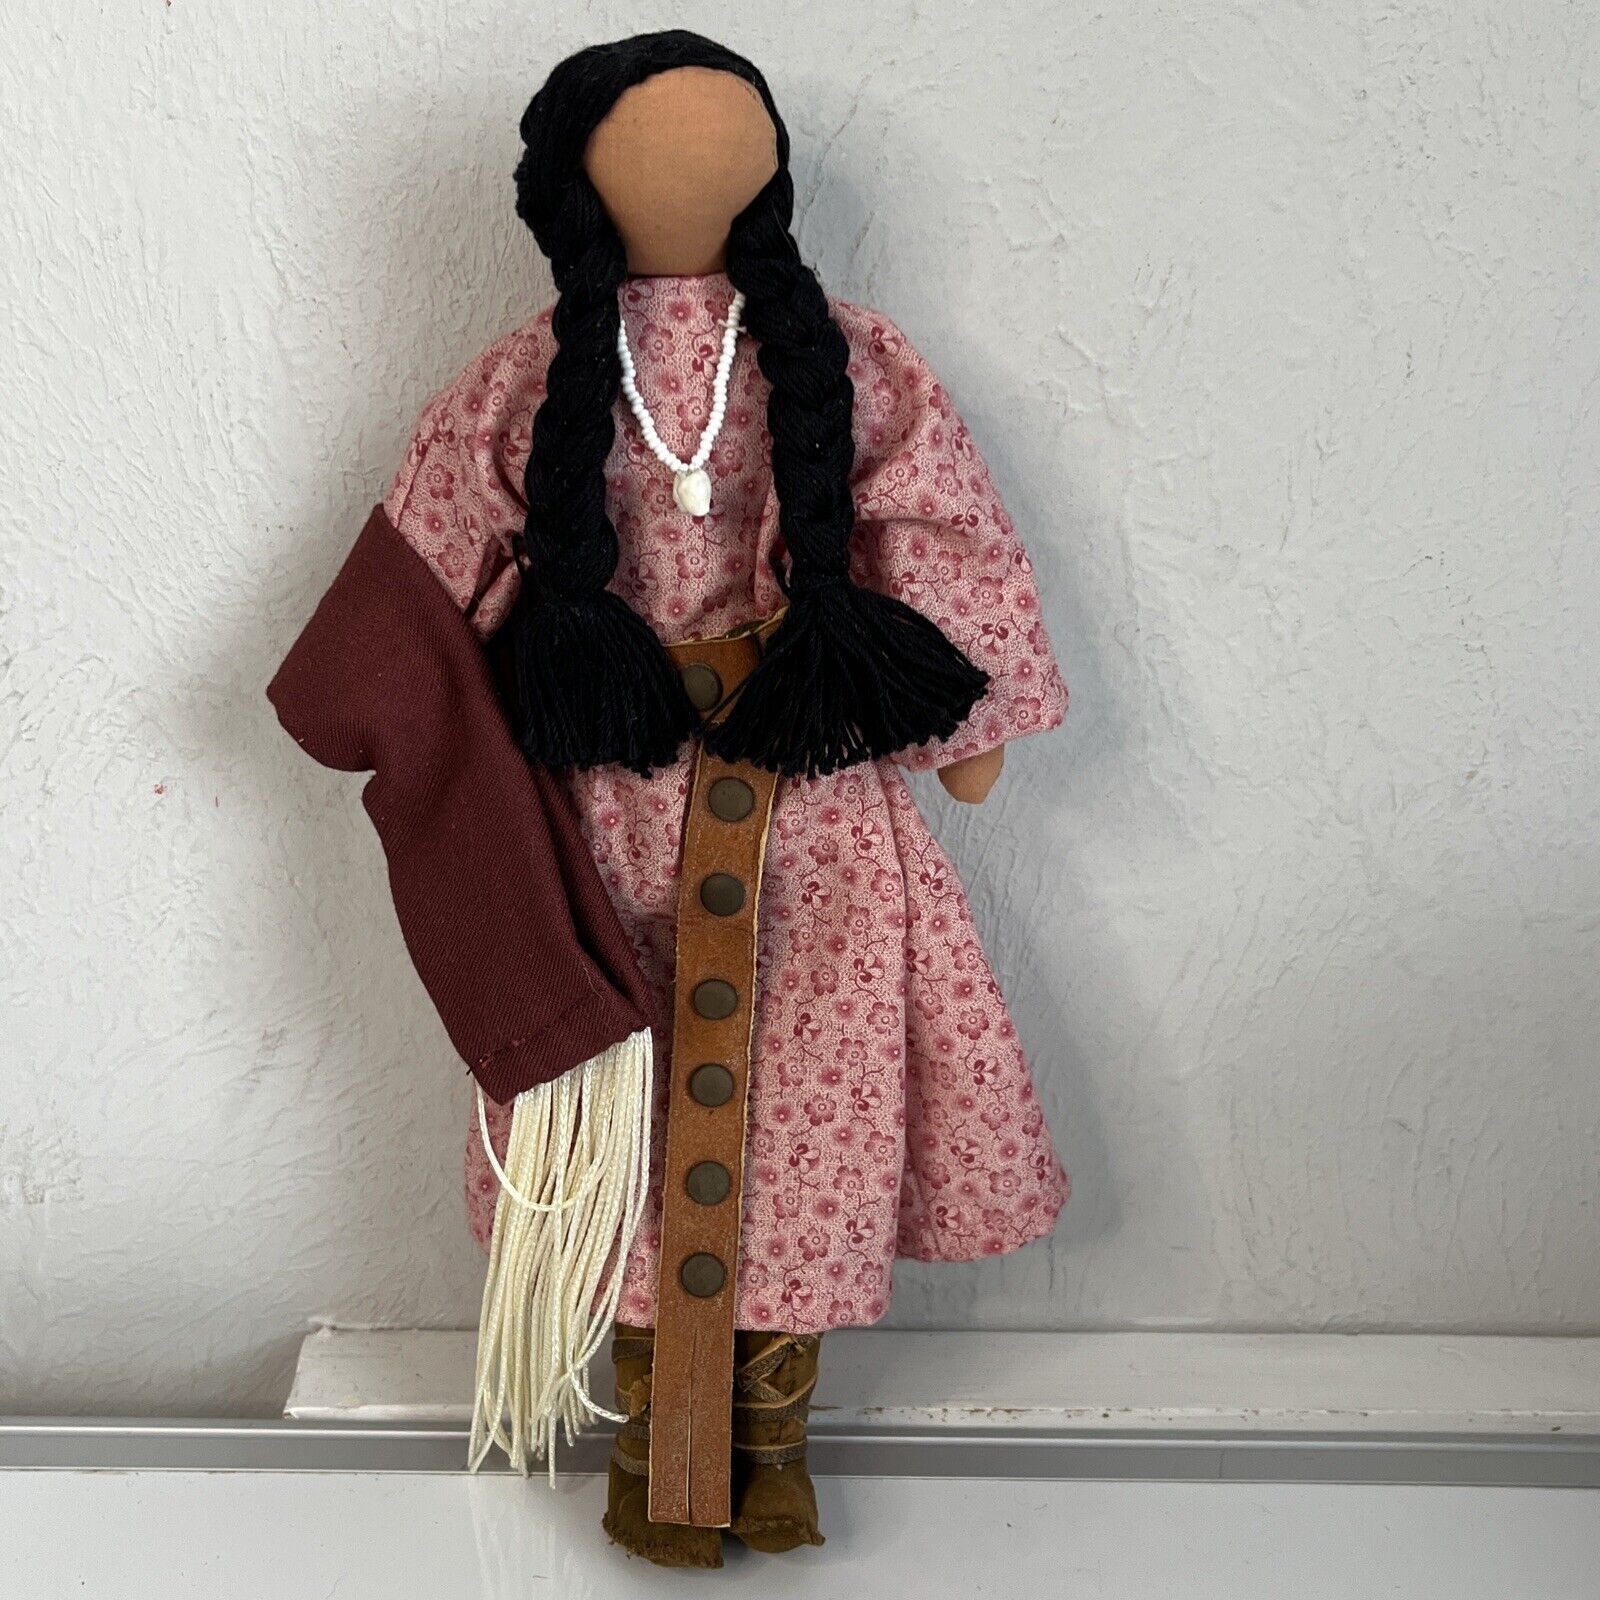 1991 Native American Doll Absaloka/Crow Unmarked Handmade Limited Edition 50